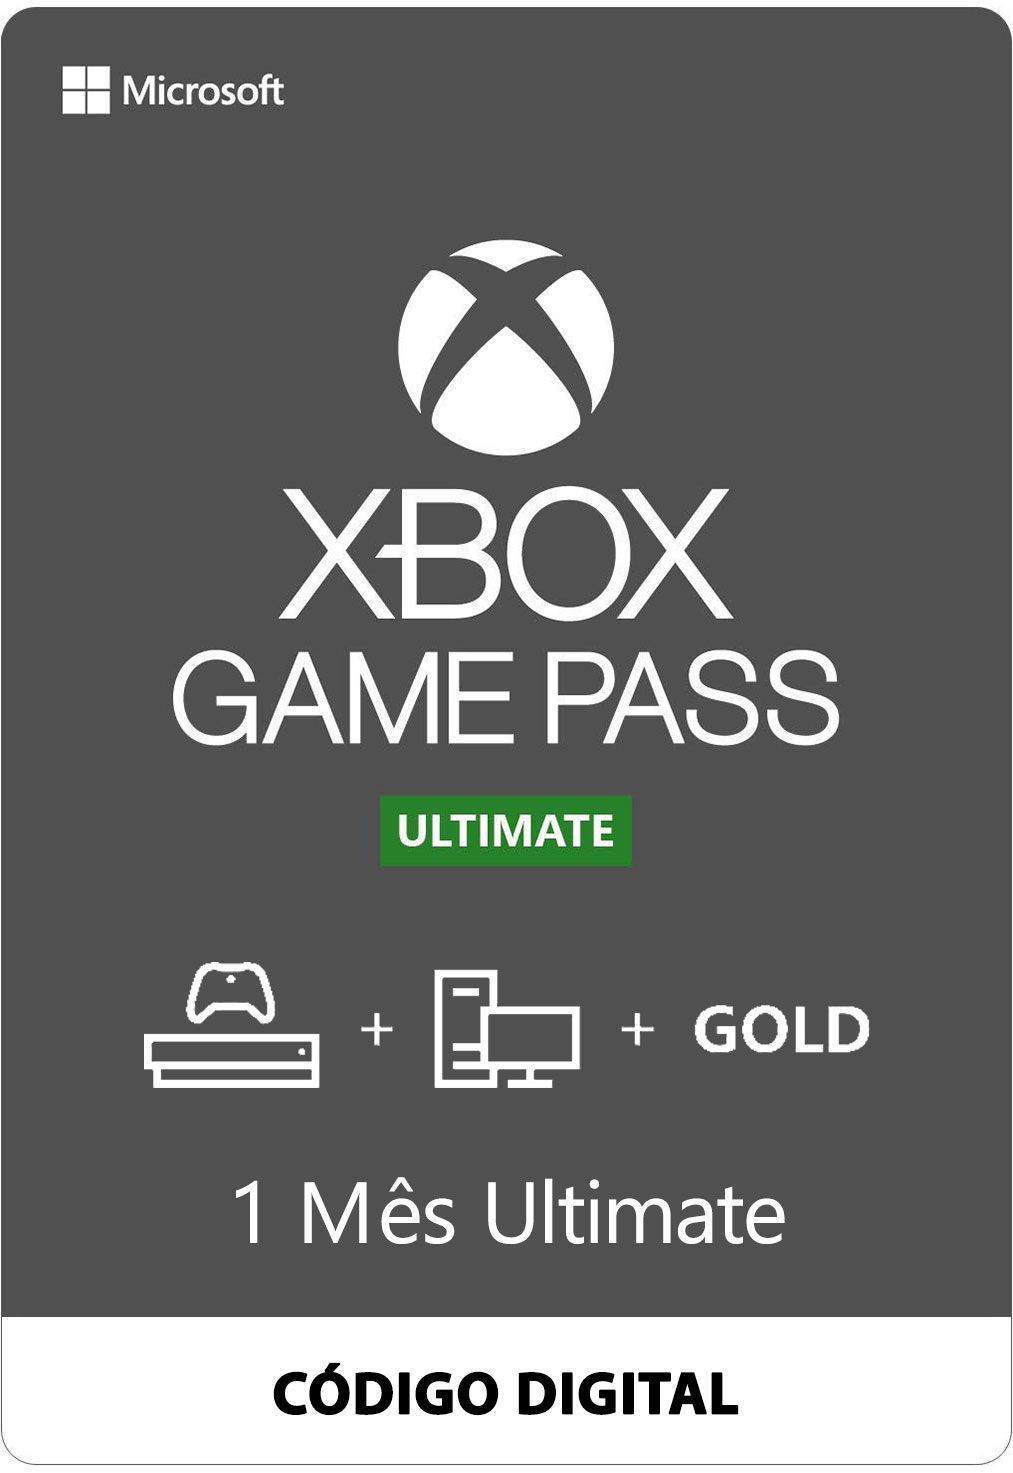 xbox game pass pc limit download speed